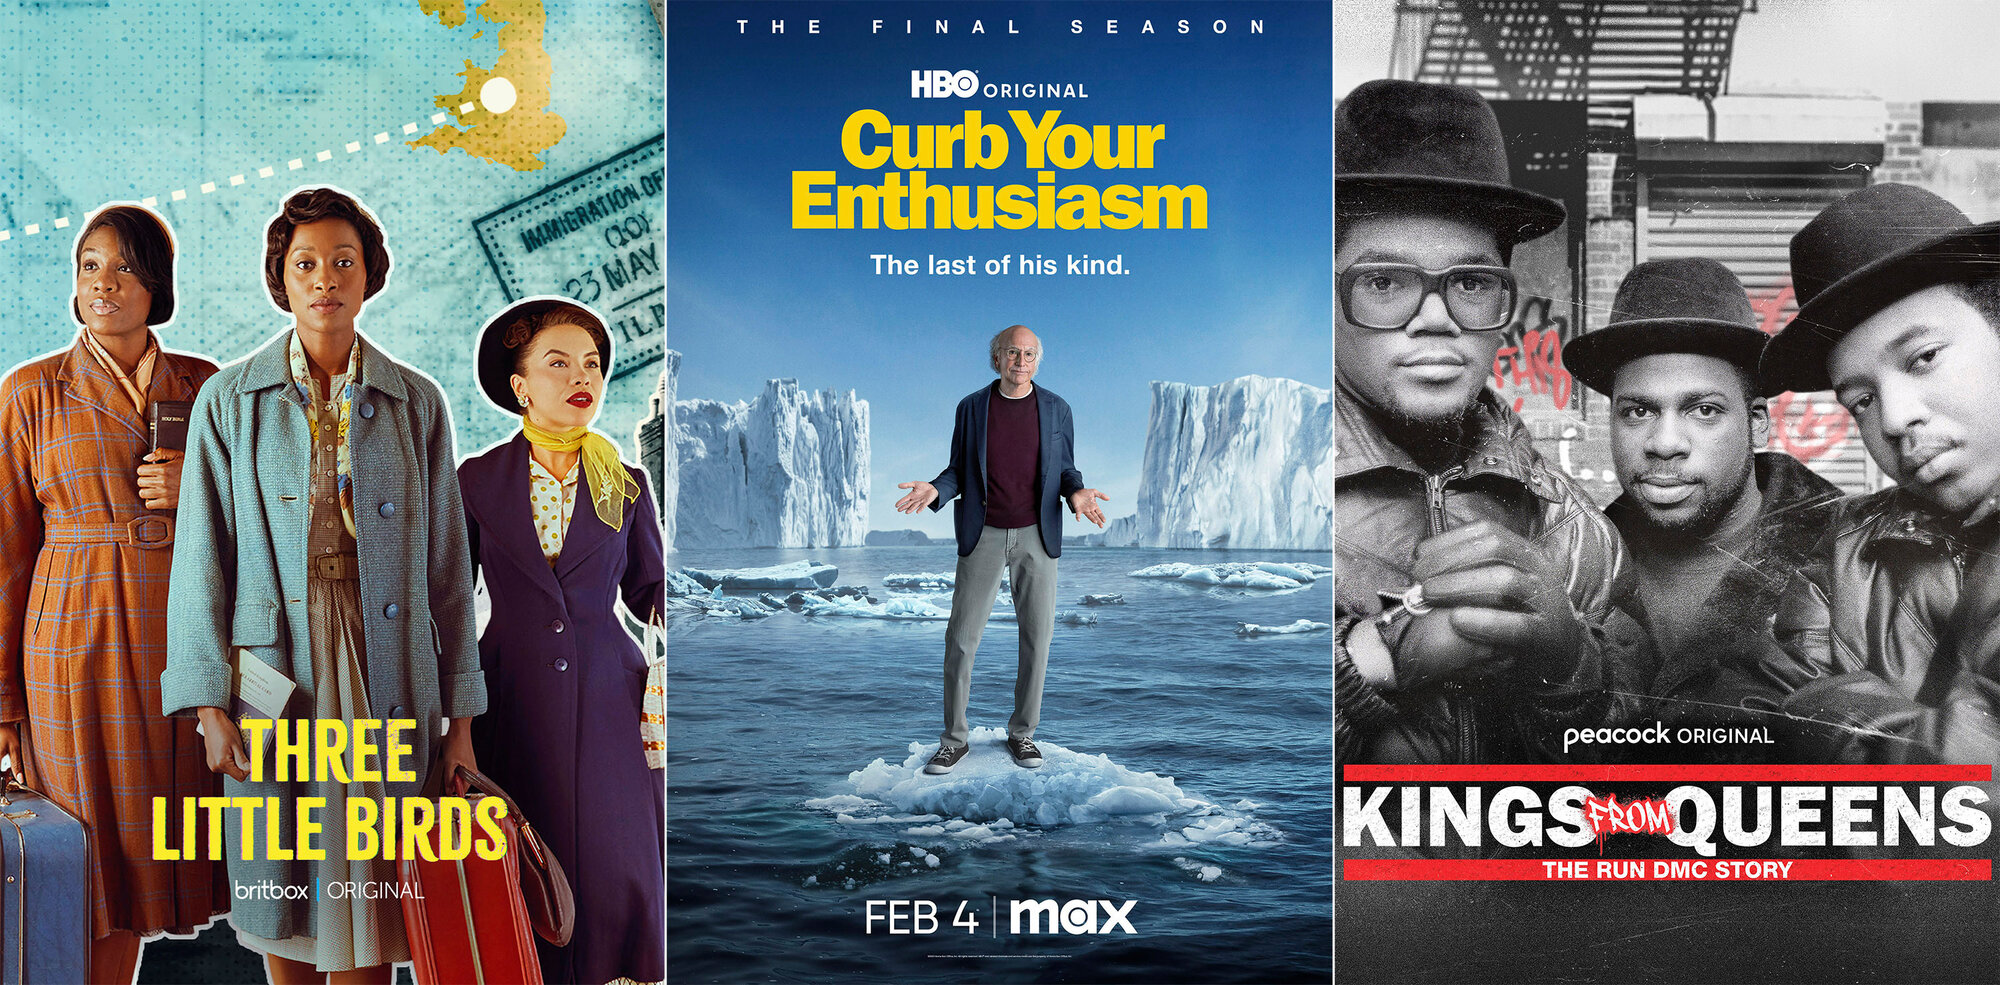 This combination of photos shows promotional art for "Three Little Birds," premiering Feb. 1 on Britbox, left, "Curb Your Enthusiasm," the final season premiering Feb. 4 on Max, center, and "Kings from Queens: The Run DMC Story," premiering Feb. 1 on Peacock.